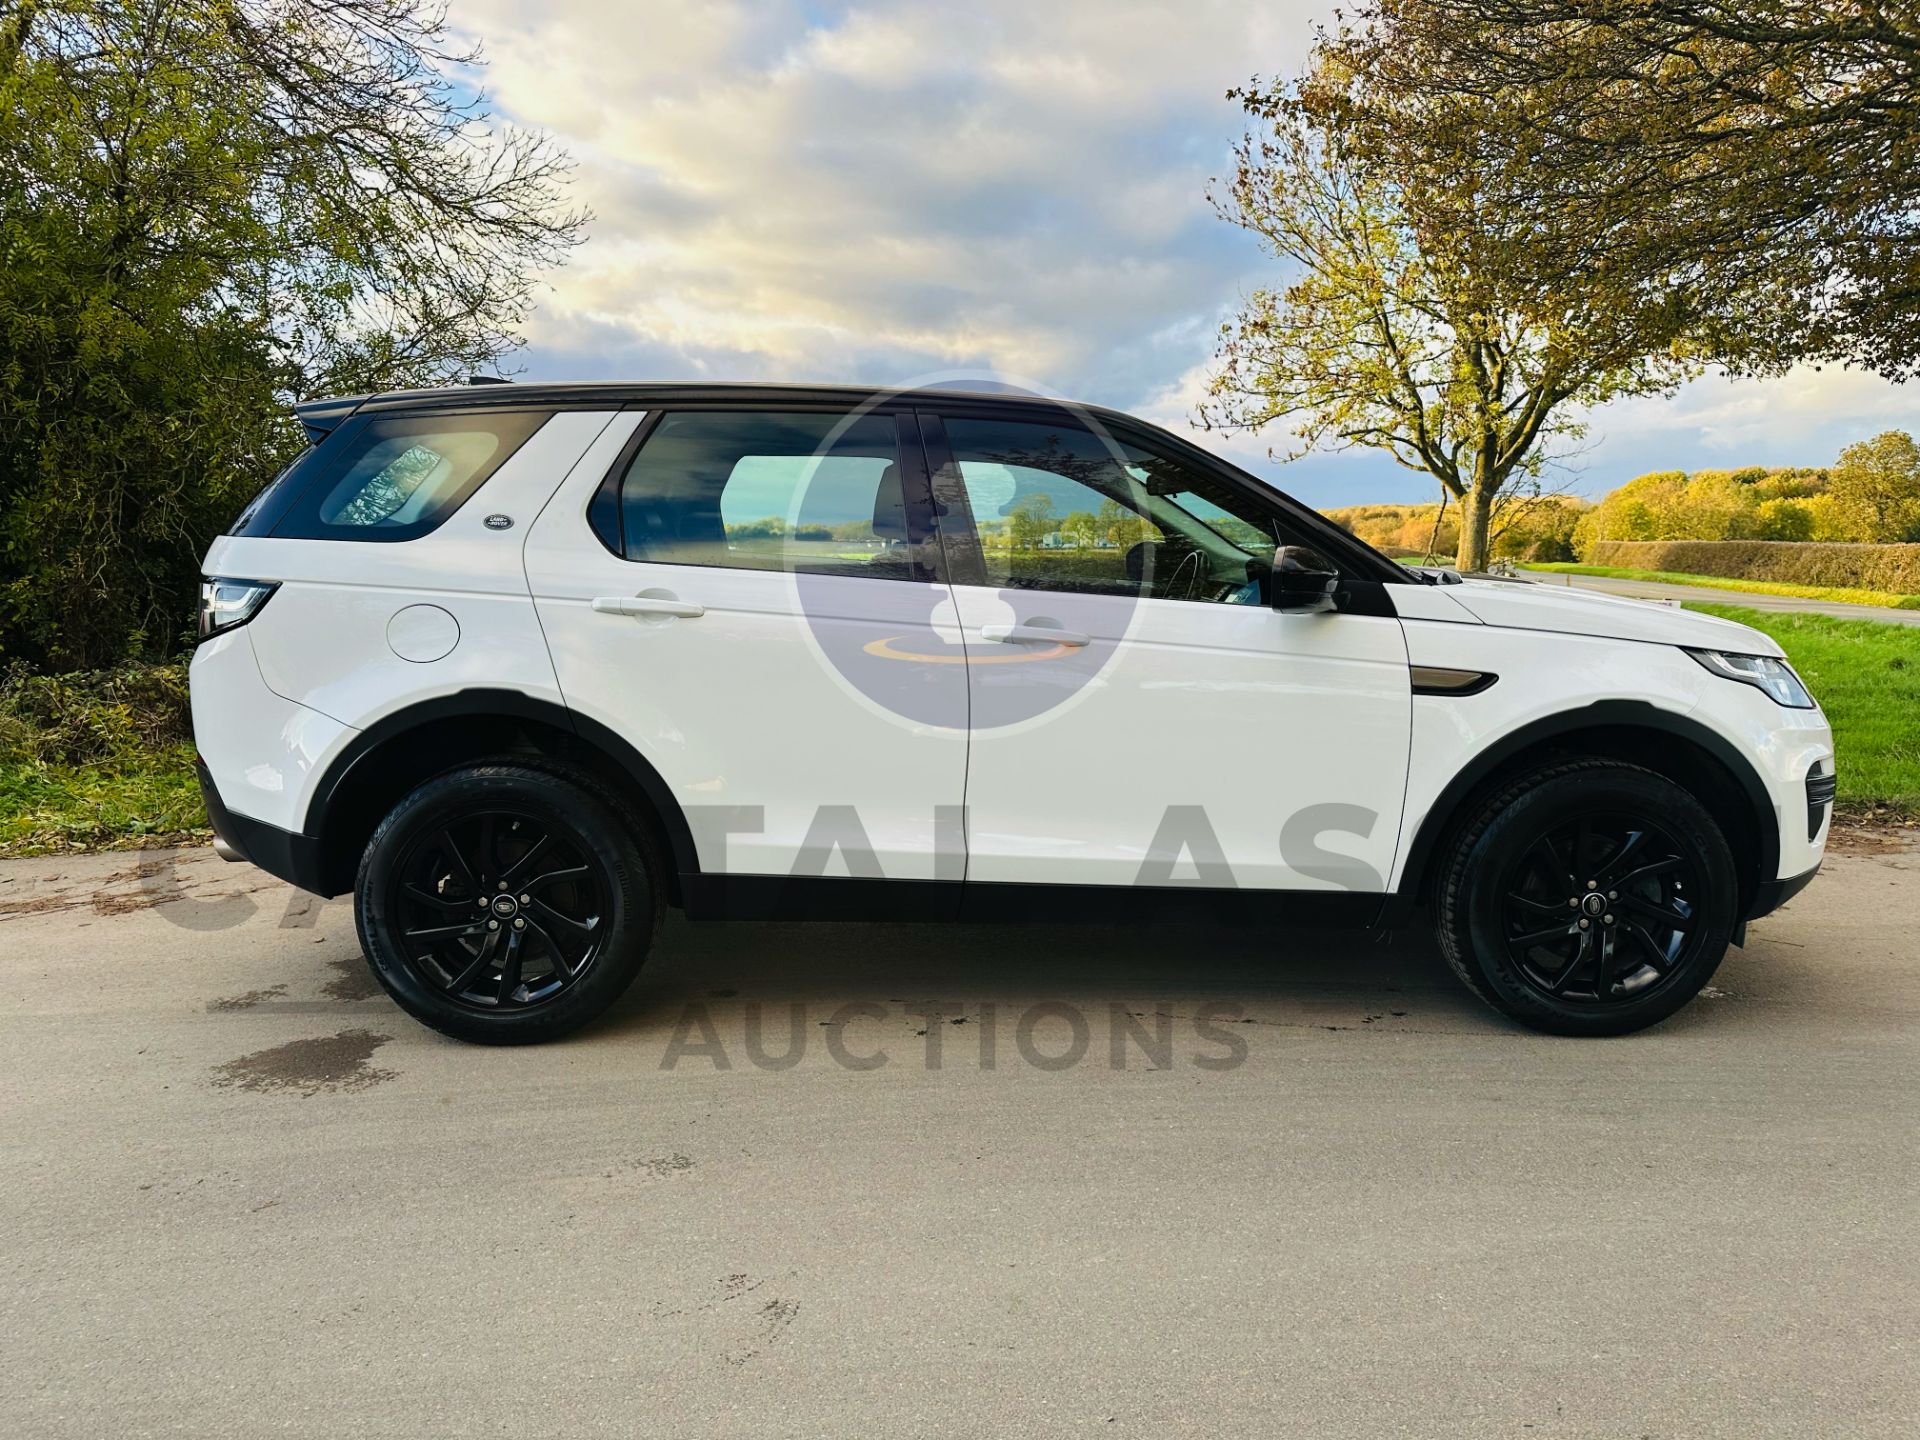 (On Sale) LAND ROVER DISCOVERY SPORT *SE* 5 DOOR SUV (2019 - EURO 6) 2.0 ED4 - AUTO STOP/START - Image 14 of 38